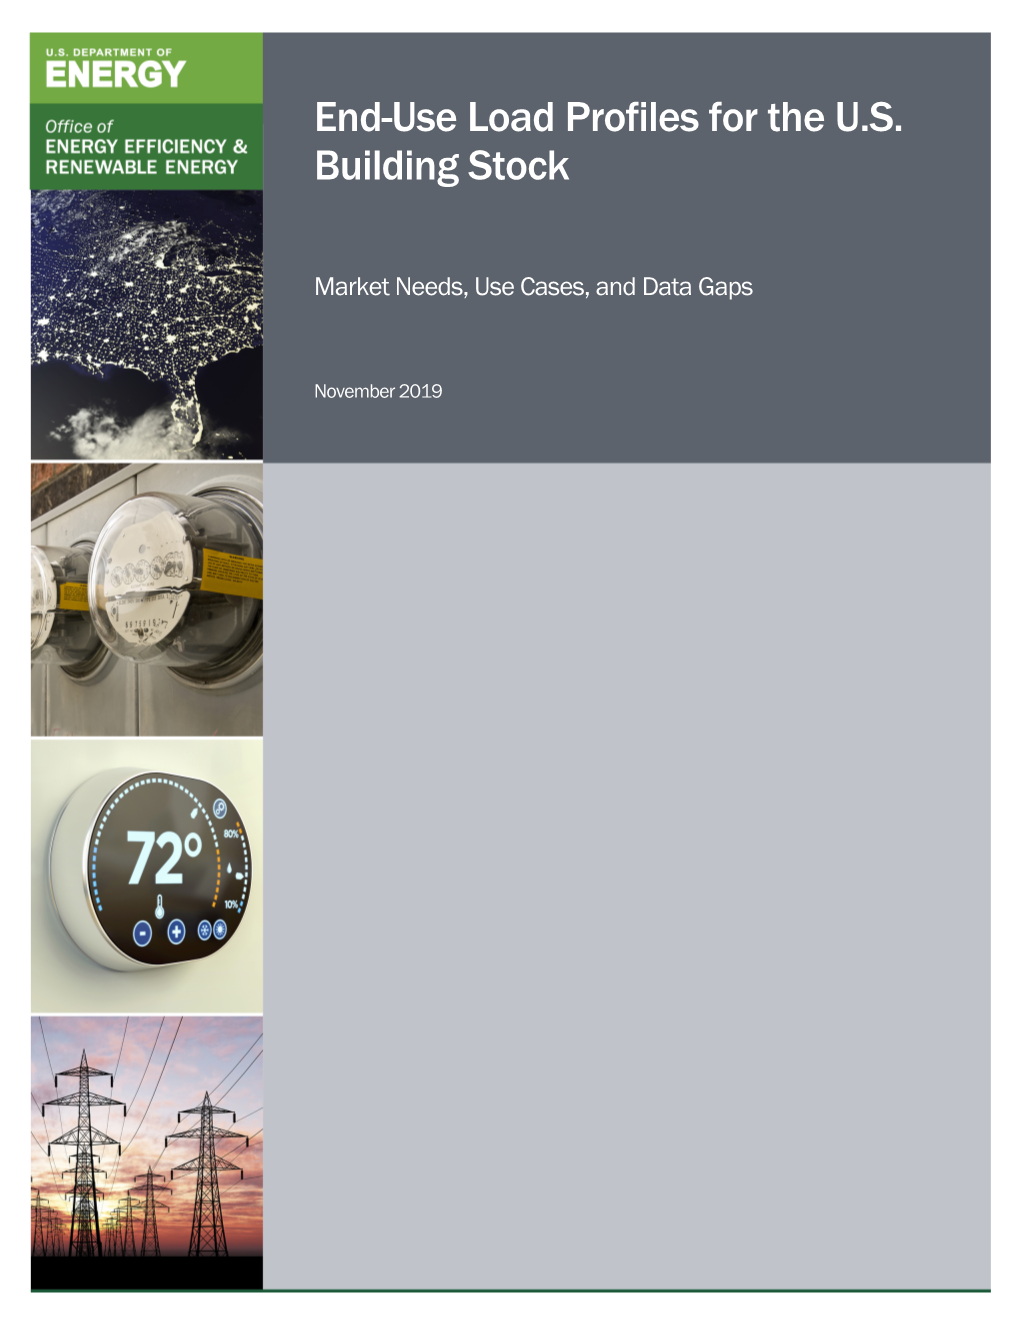 End-Use Load Profiles for the U.S. Building Stock